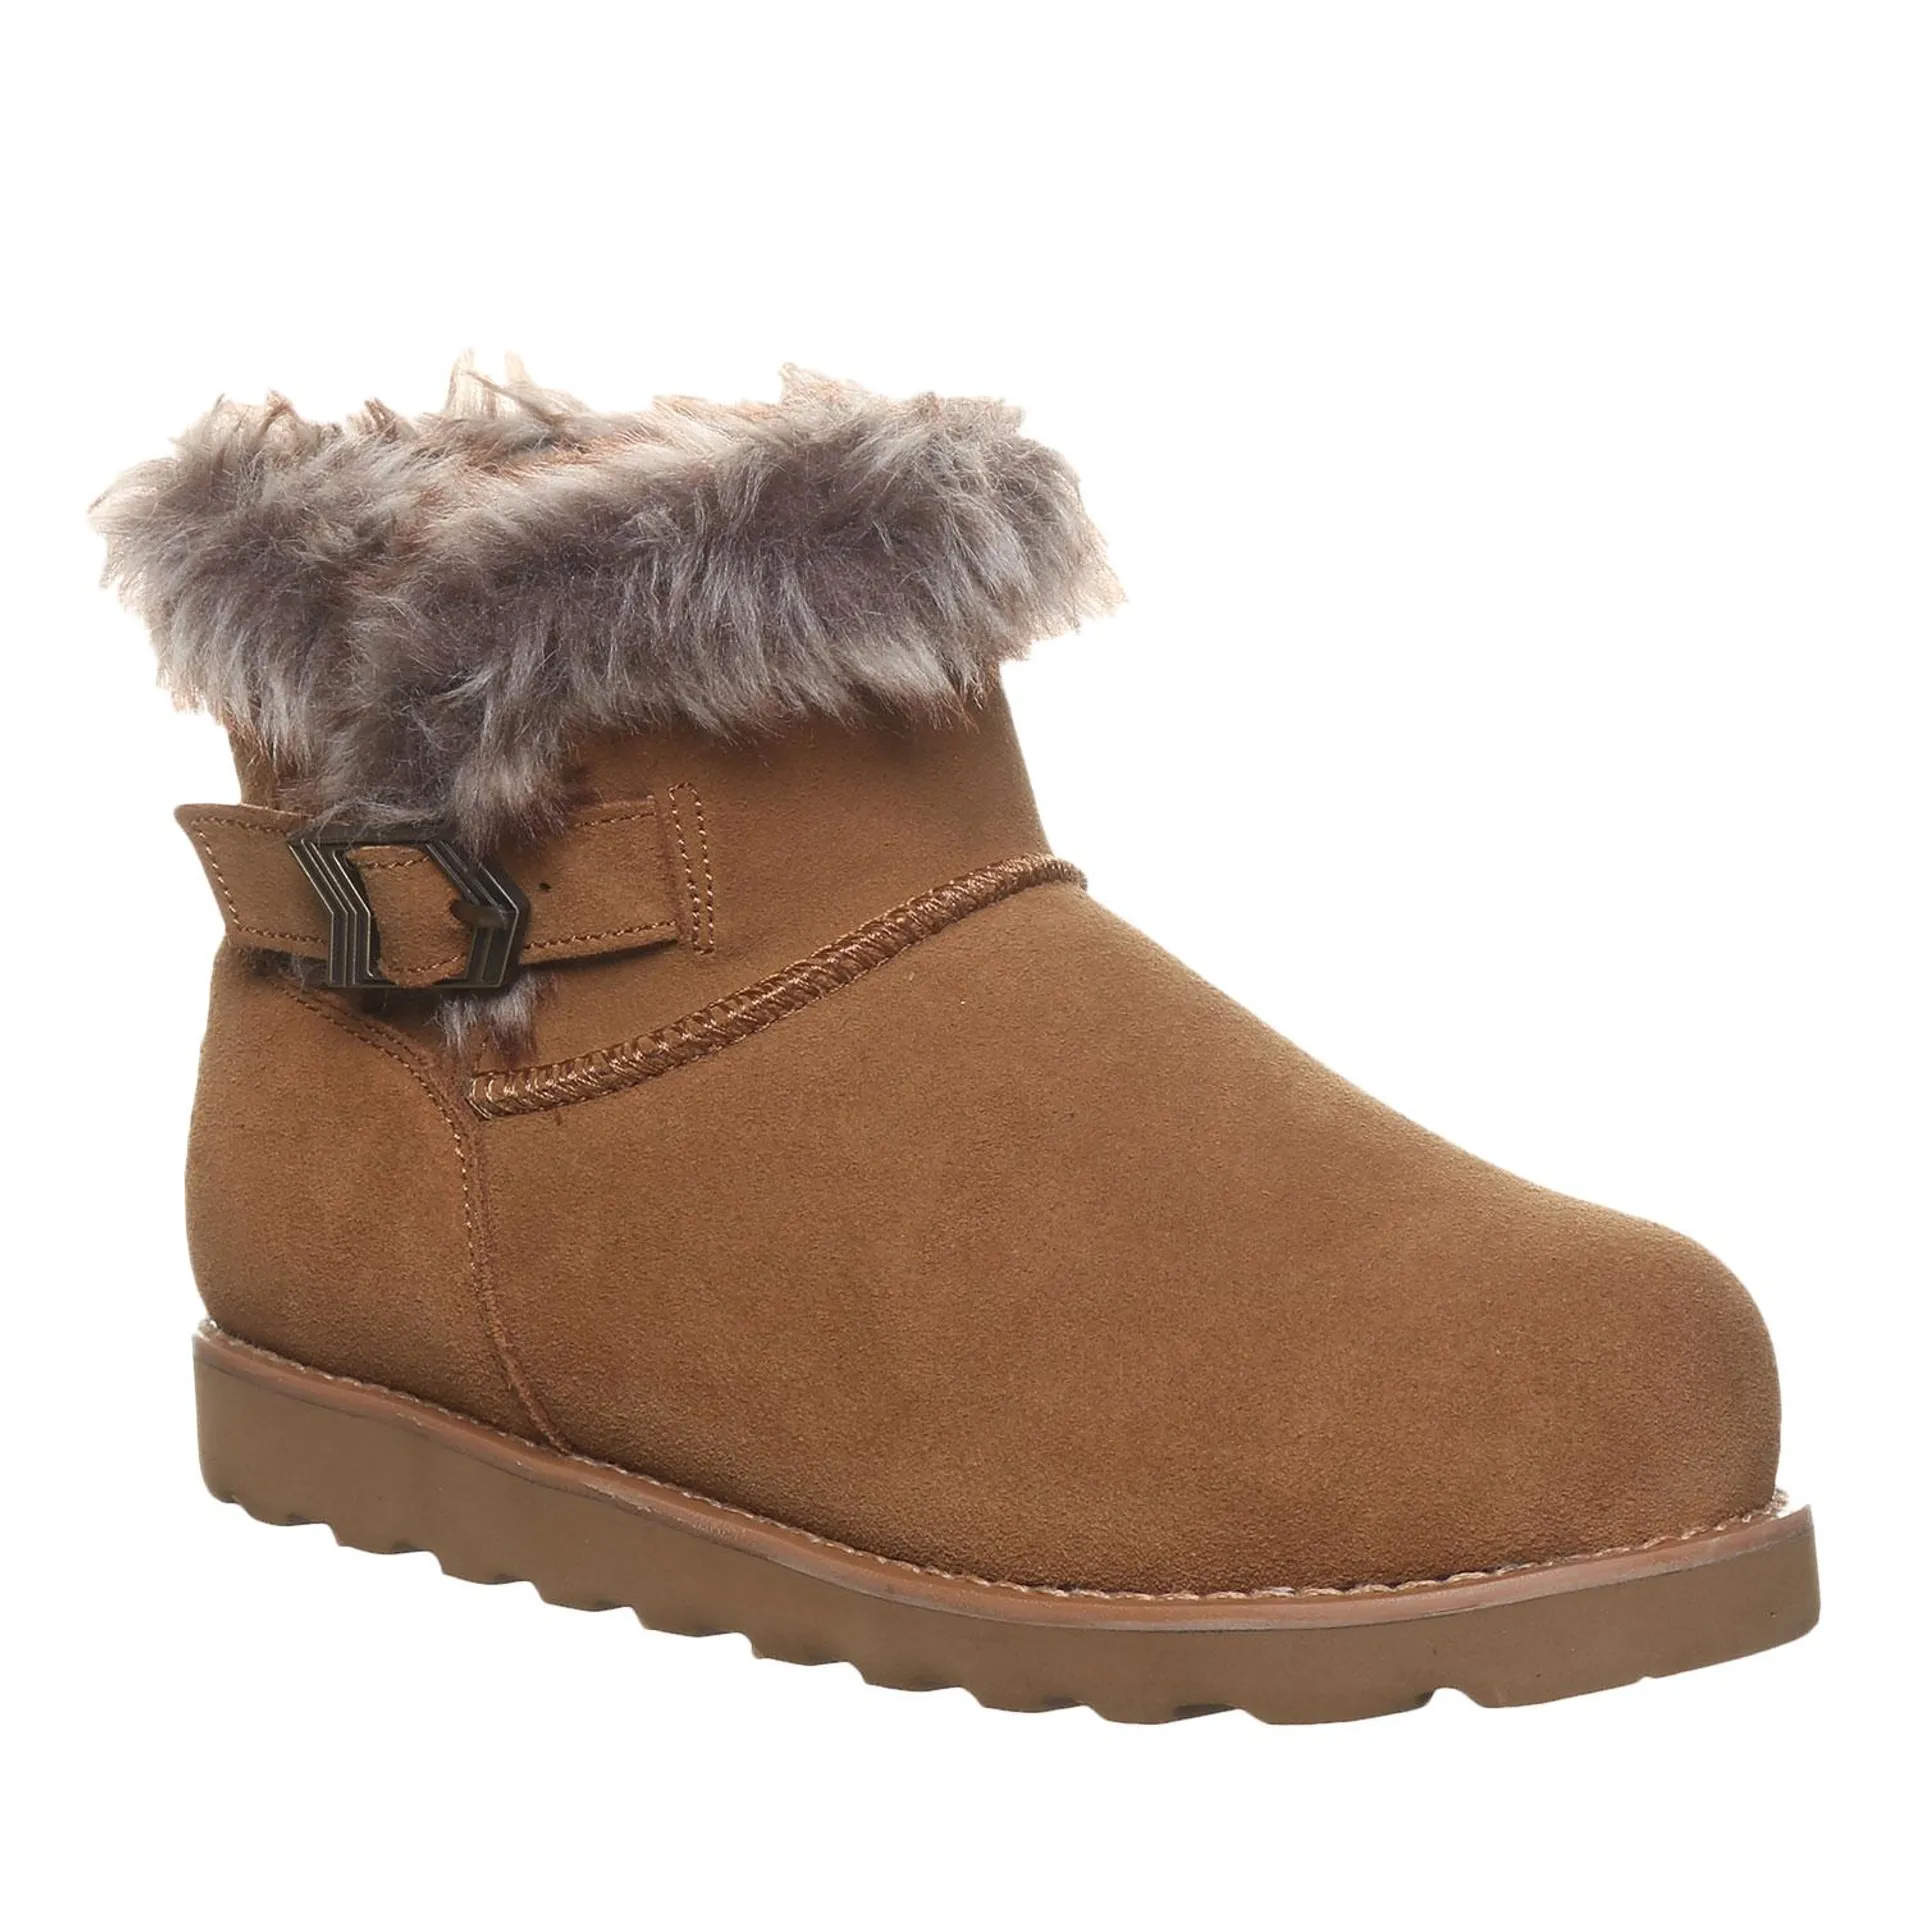 Bearpaw Miriam Women's Cold-Weather Boots